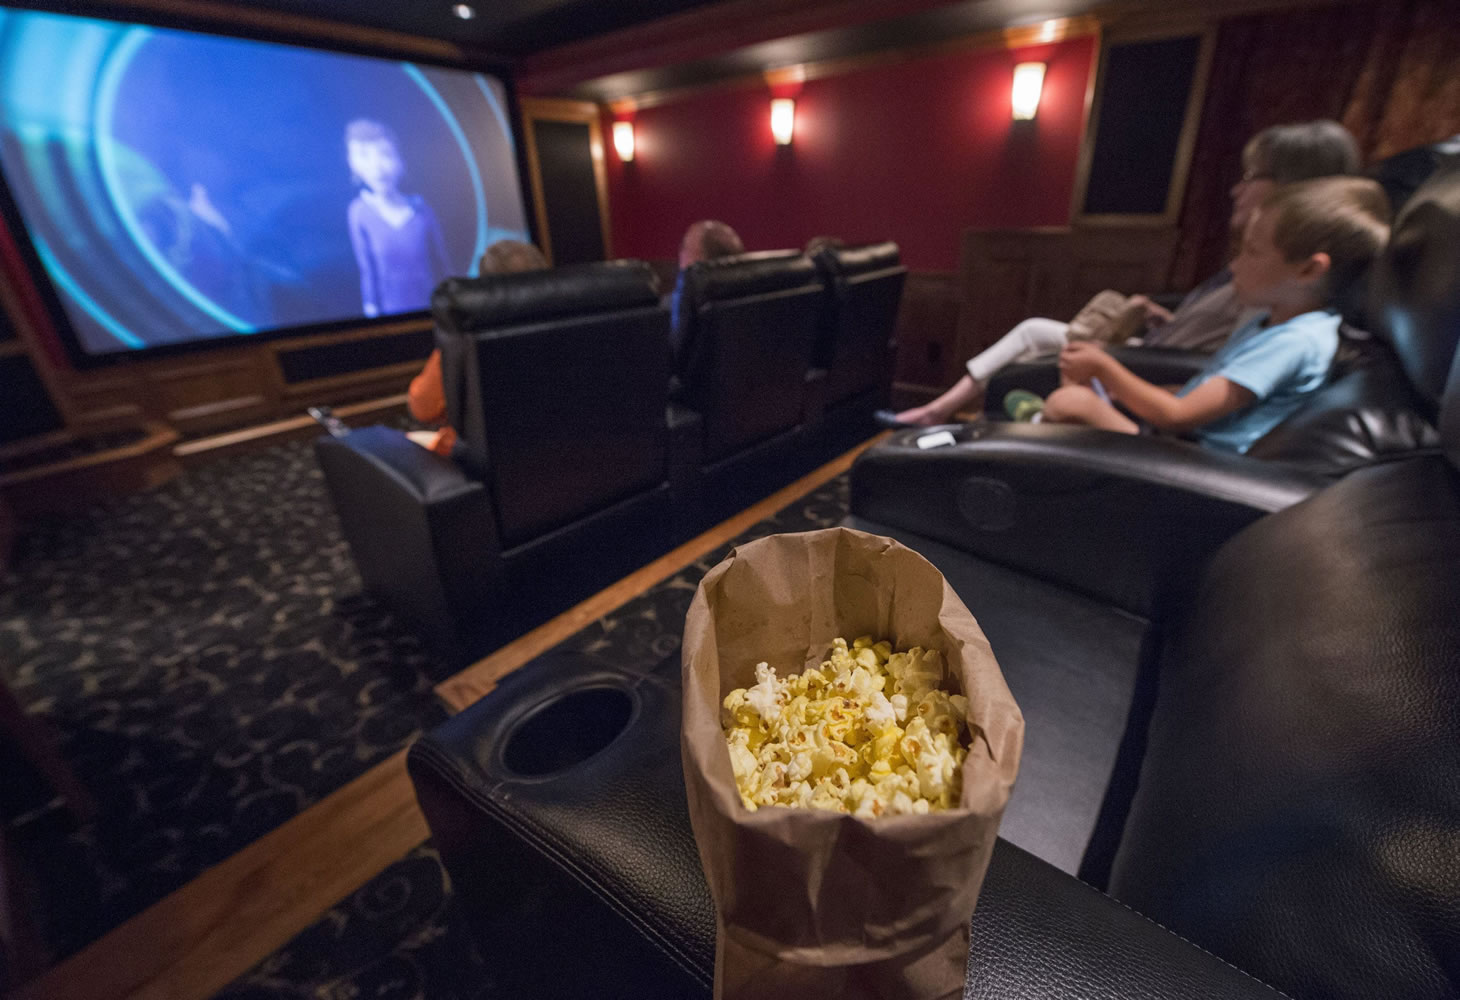 Home theaters grow in popularity